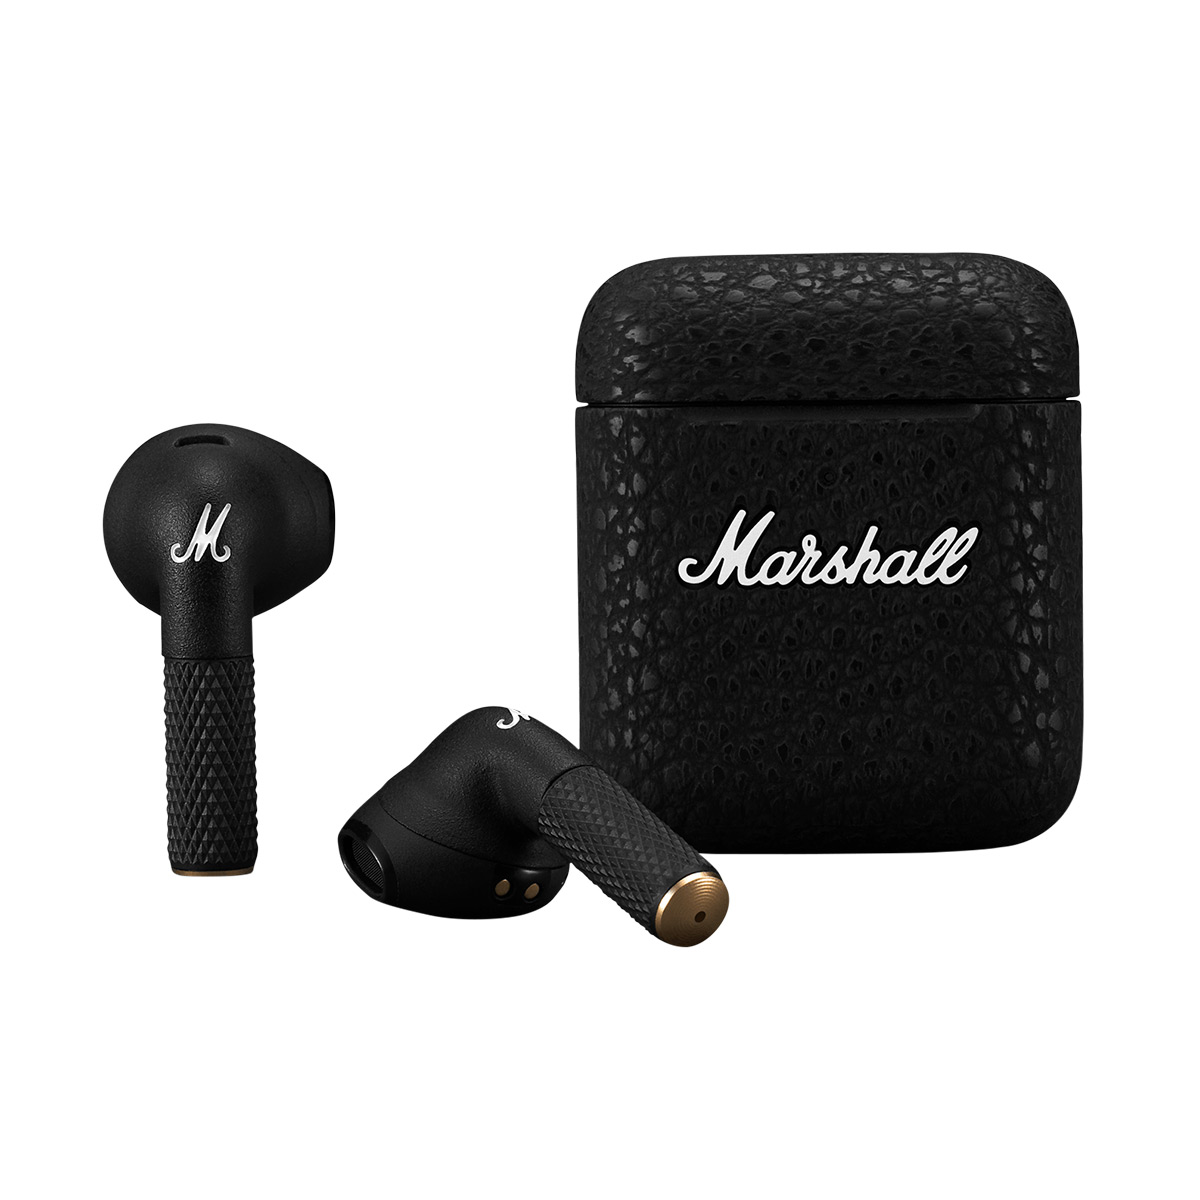 Marshall Minor III Bluetooth Earbuds | The Container Store